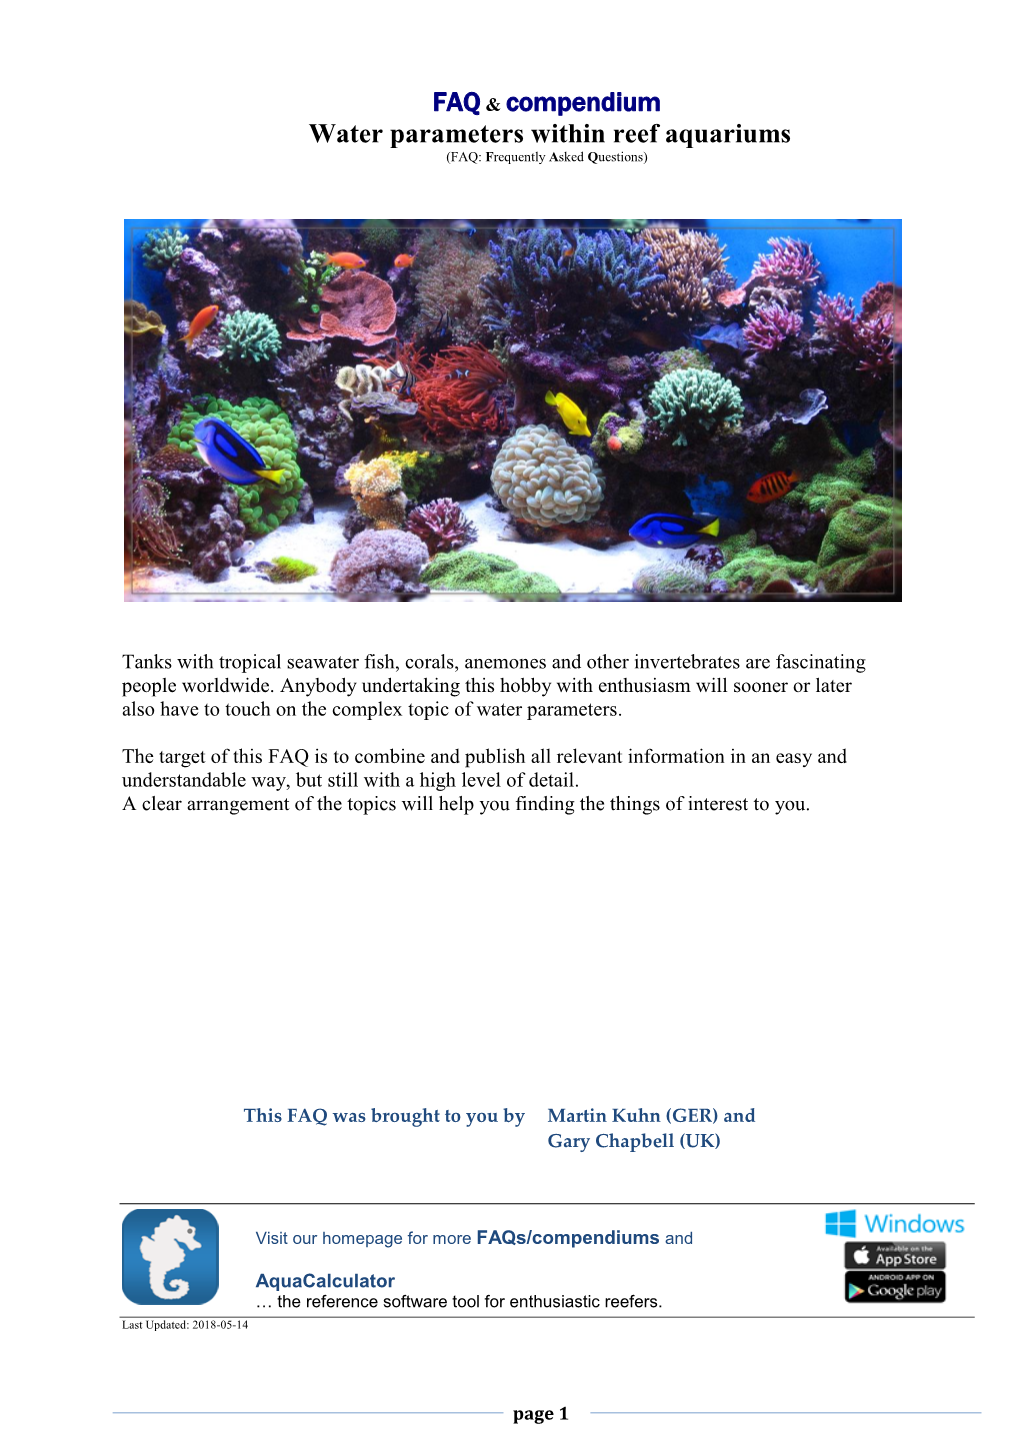 FAQ & Compendium Water Parameters Within Reef Aquariums (FAQ: Frequently Asked Questions)